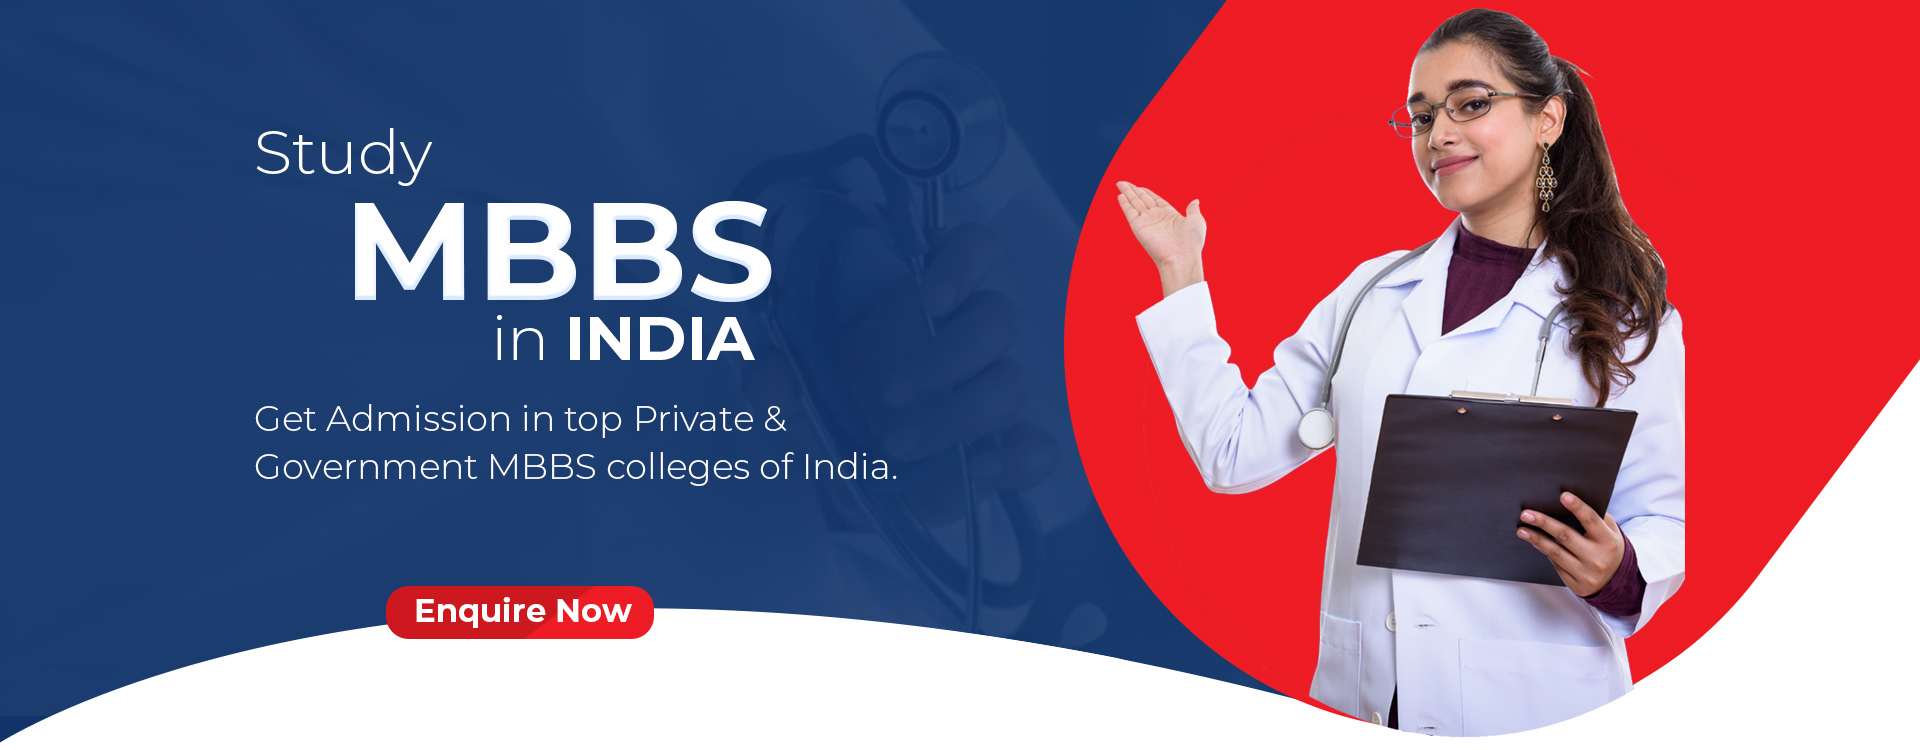 top private medical colleges in india